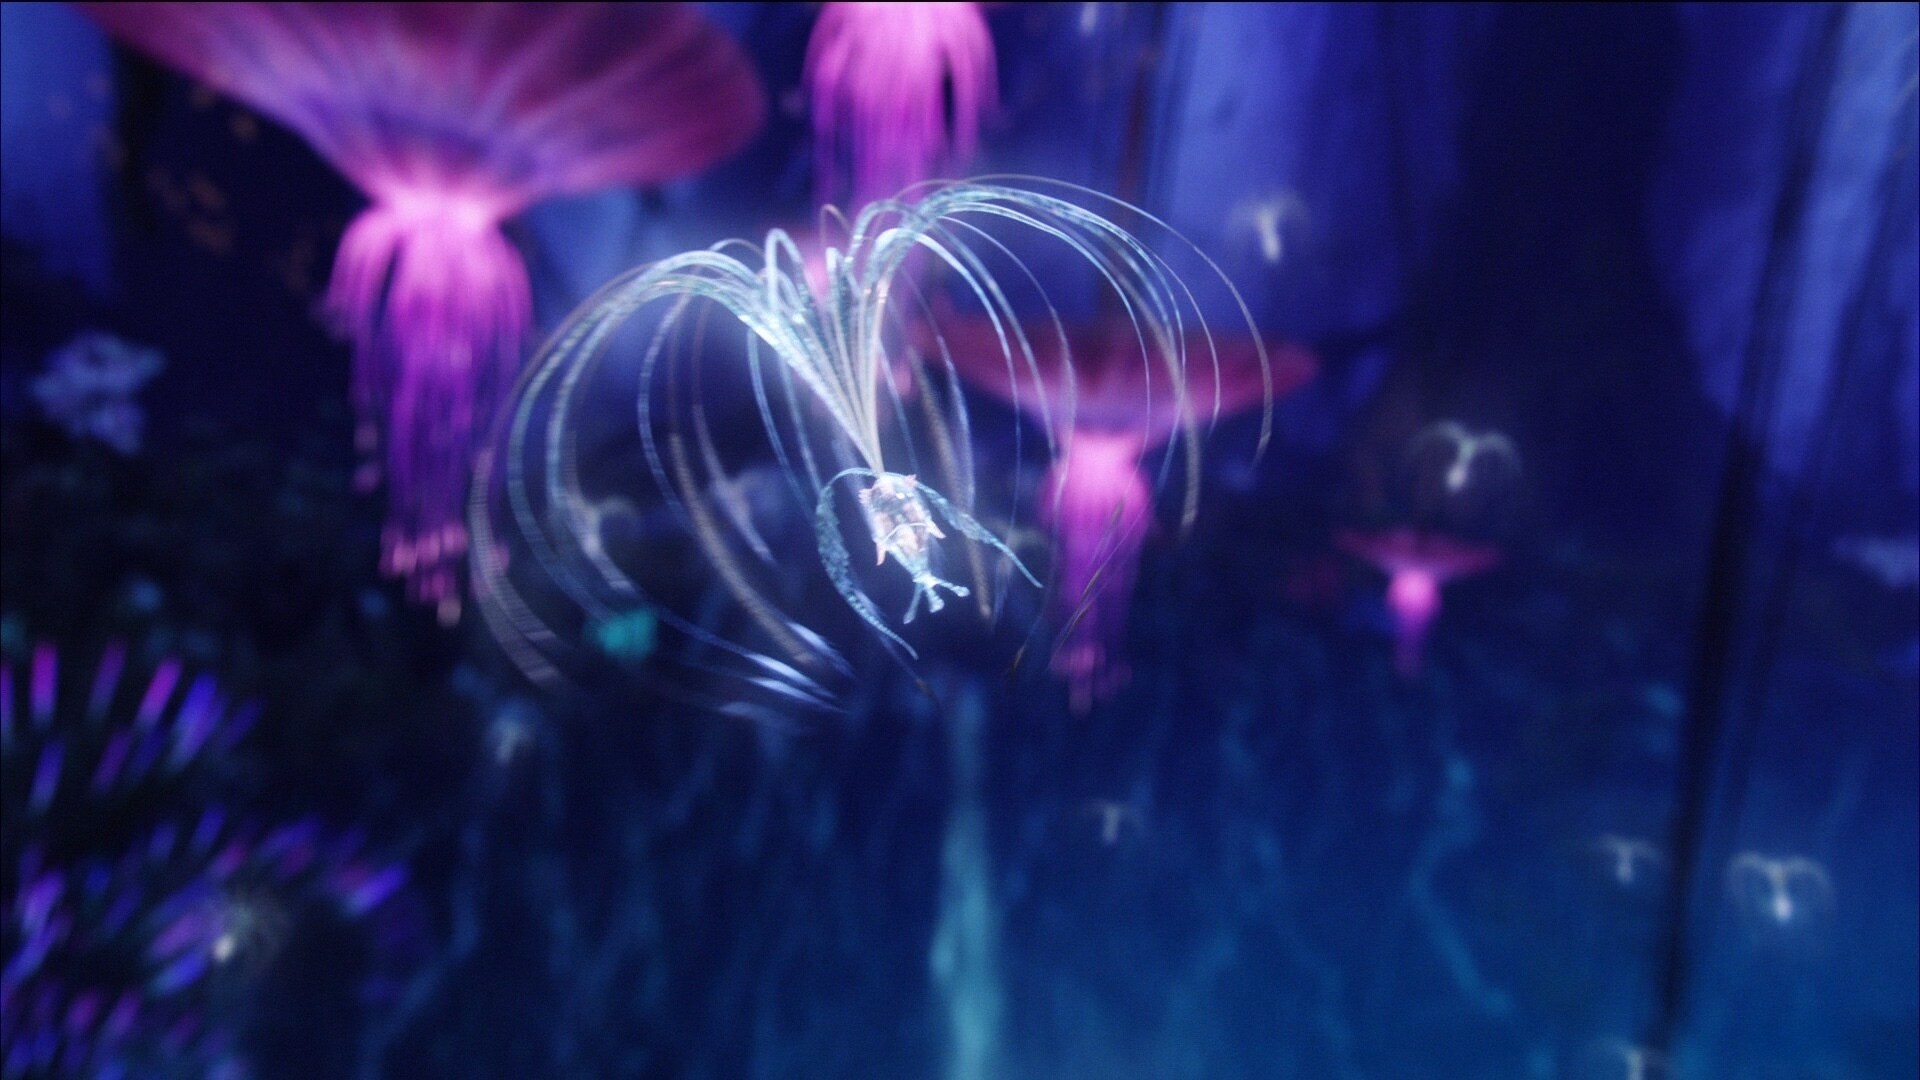 A tiny, illuminated, creature floating through the air, surrounding by other bioluminescent creatures and plants in the nighttime Pandoran forest.